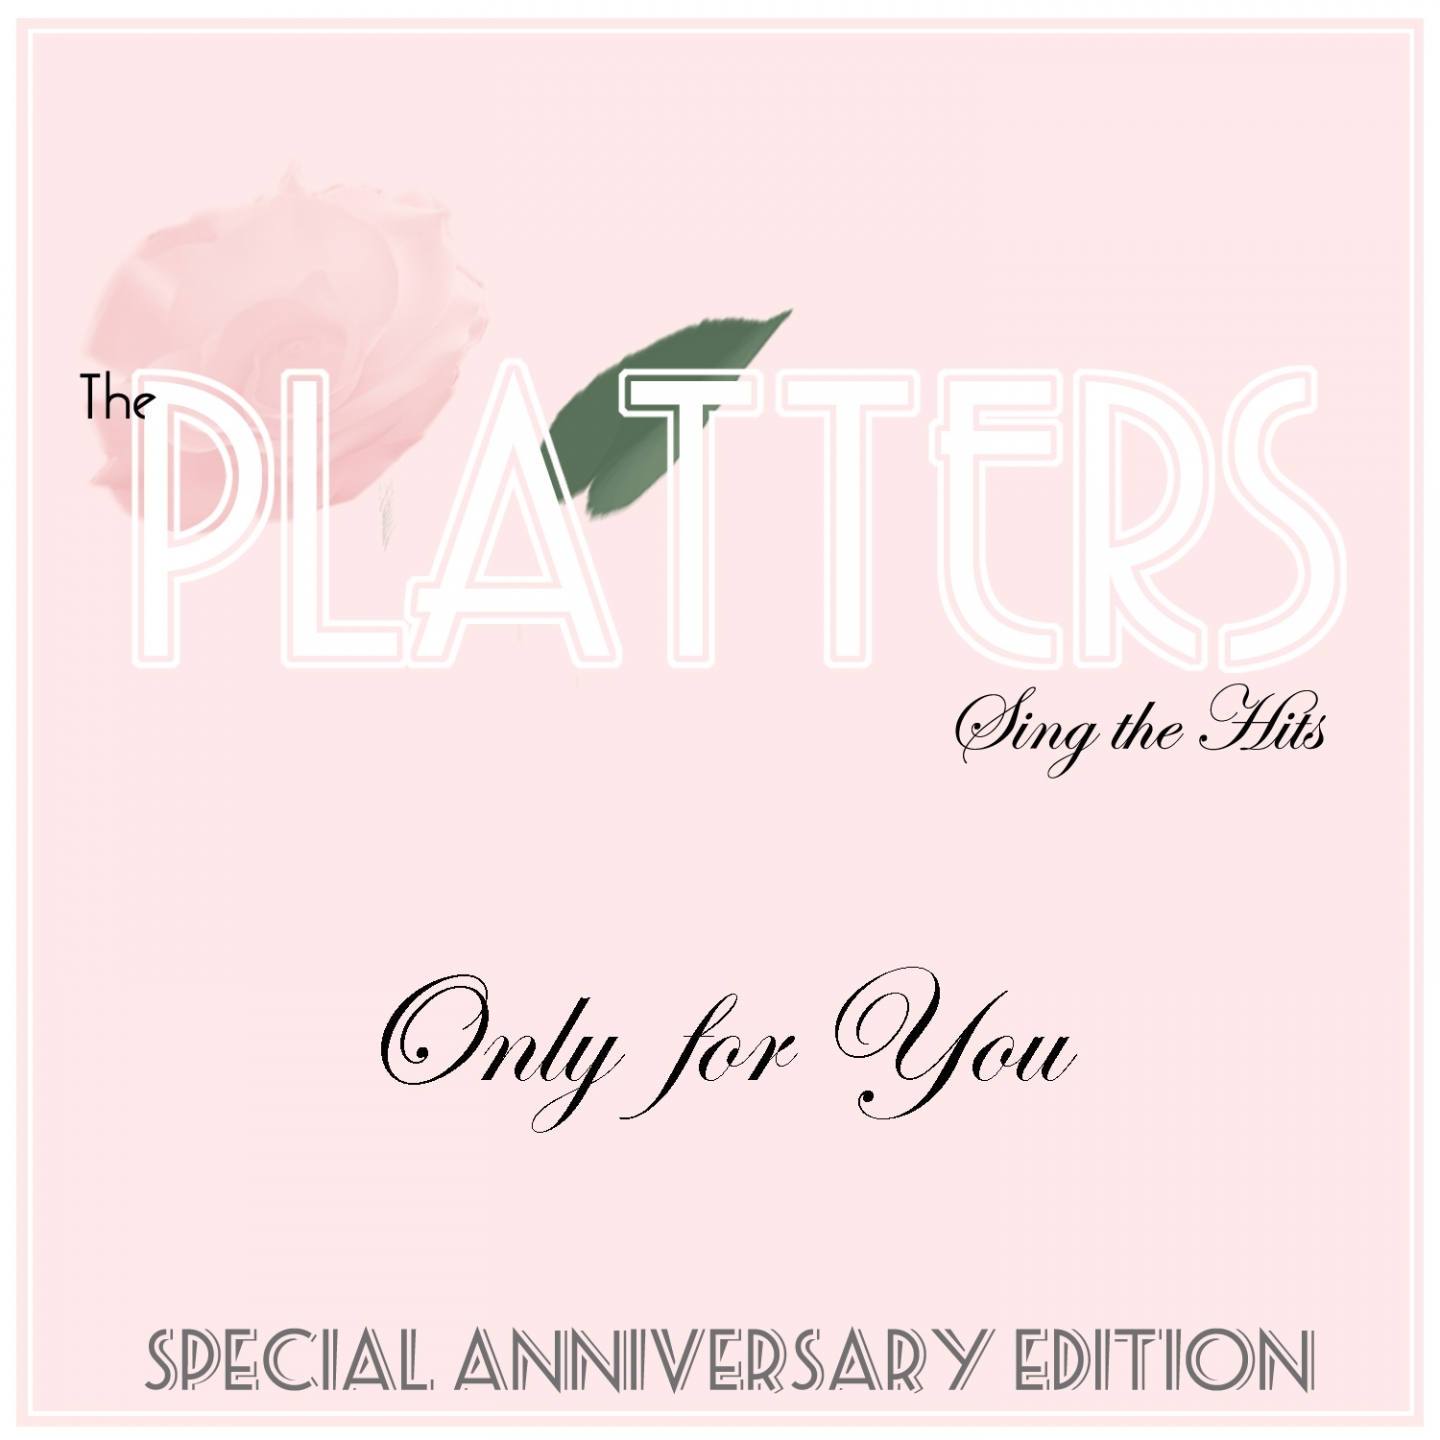 The Platters Sing the Hits Only for You